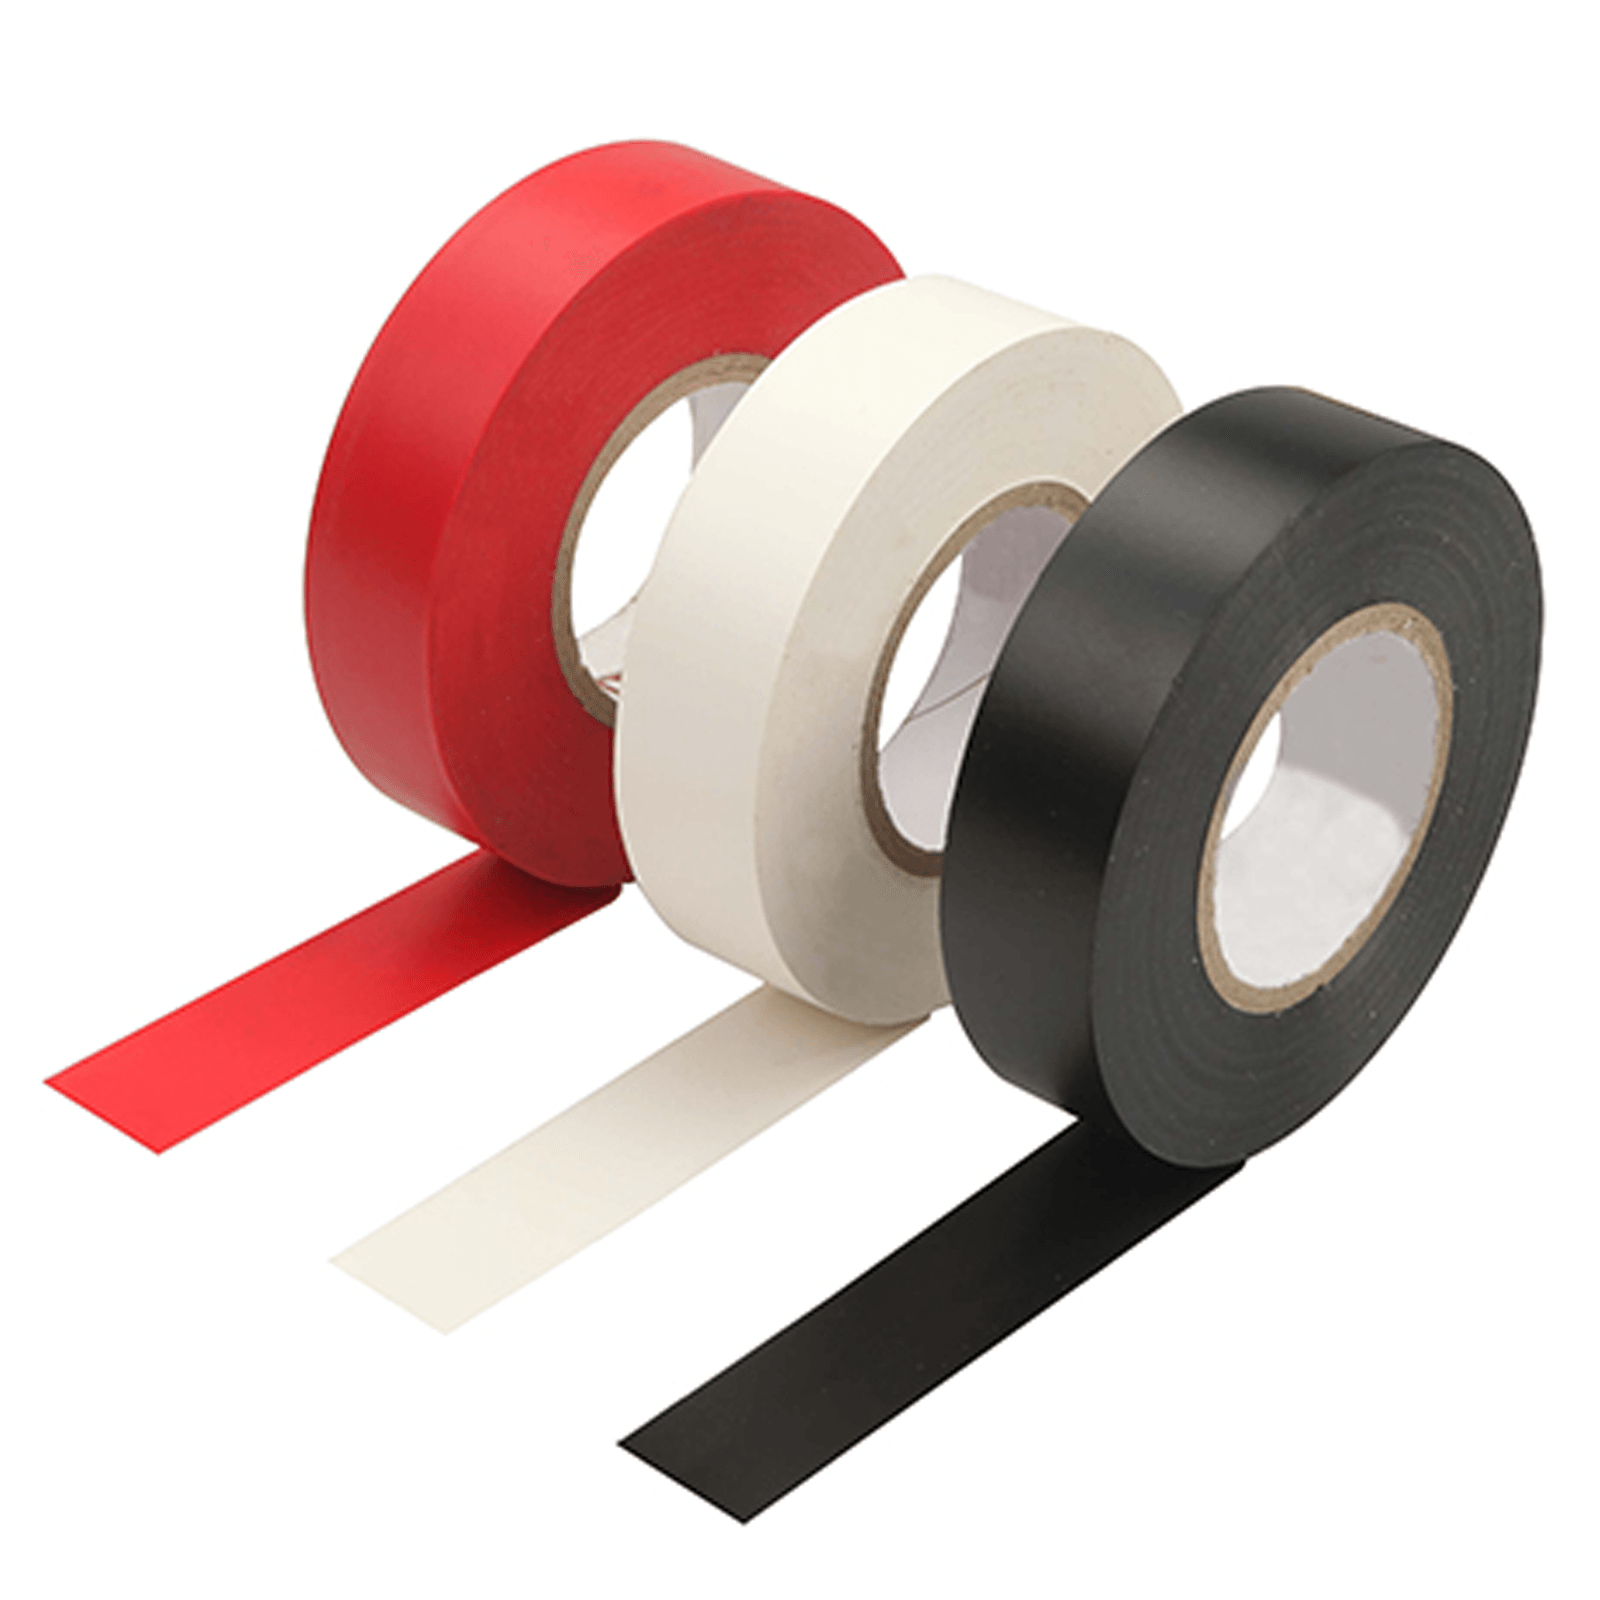 PVC Electricians and Tennis Racket Tape